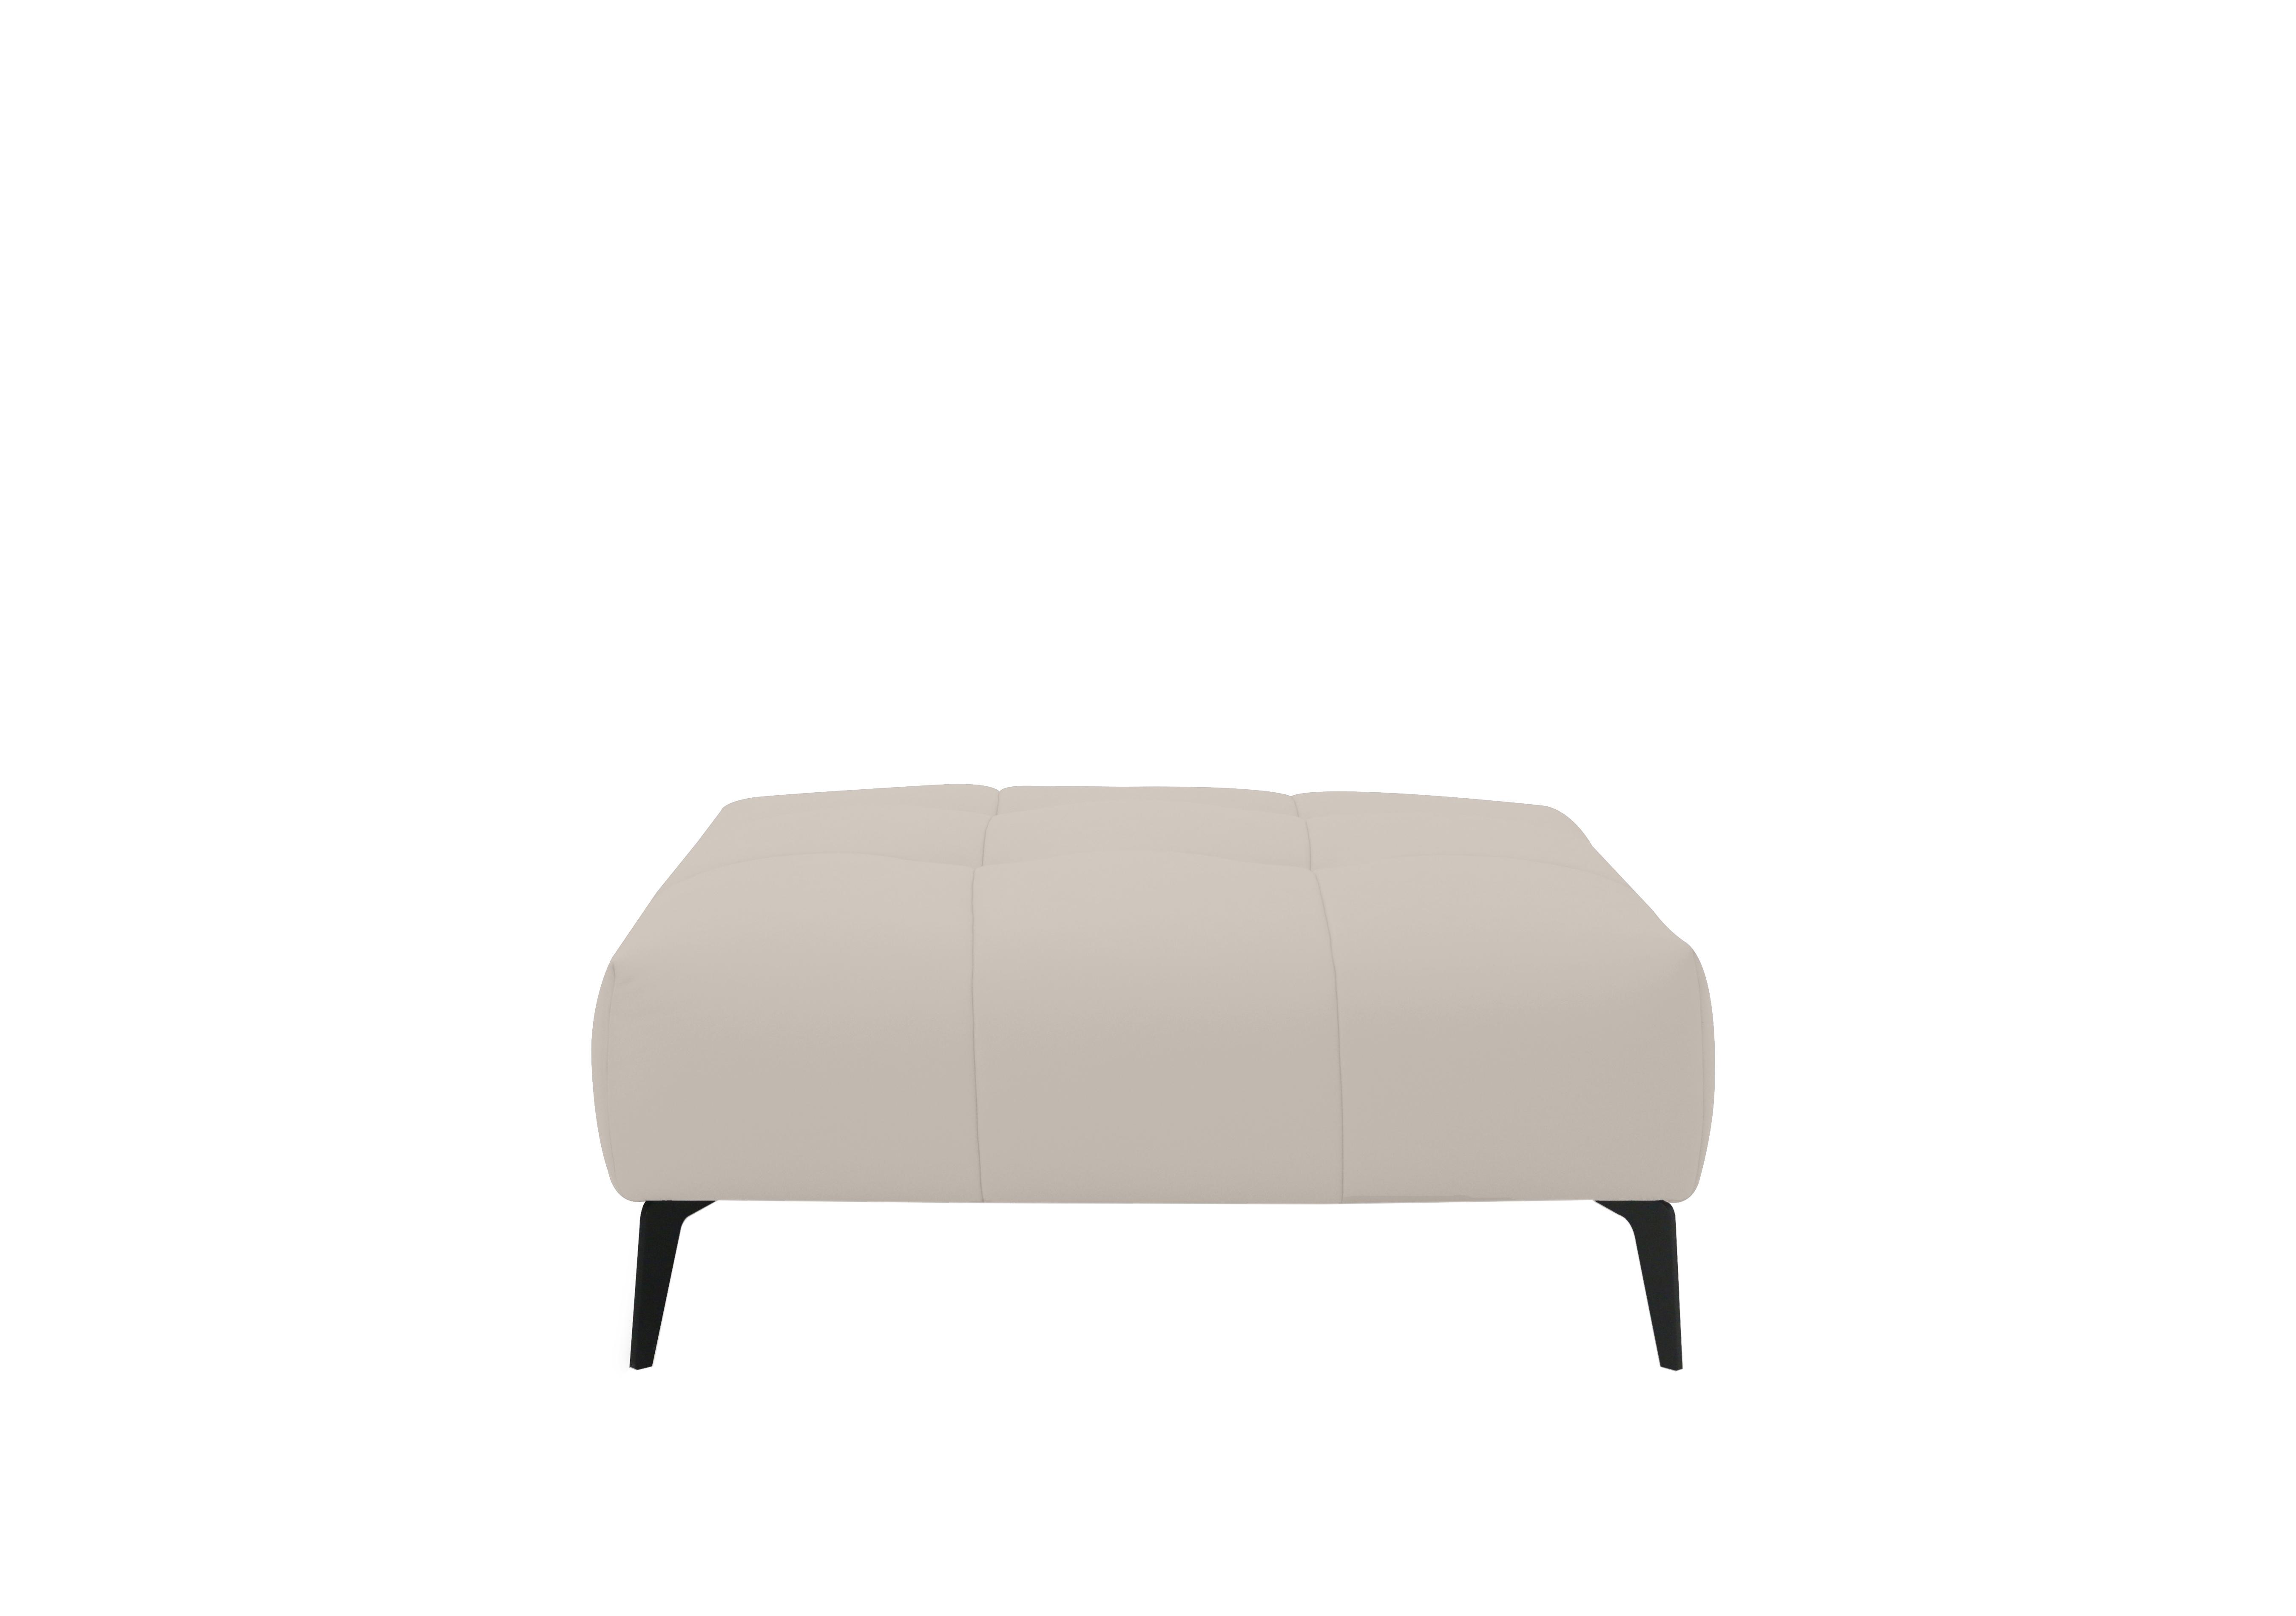 Lawson Leather Footstool in Nn-521e Frost on Furniture Village